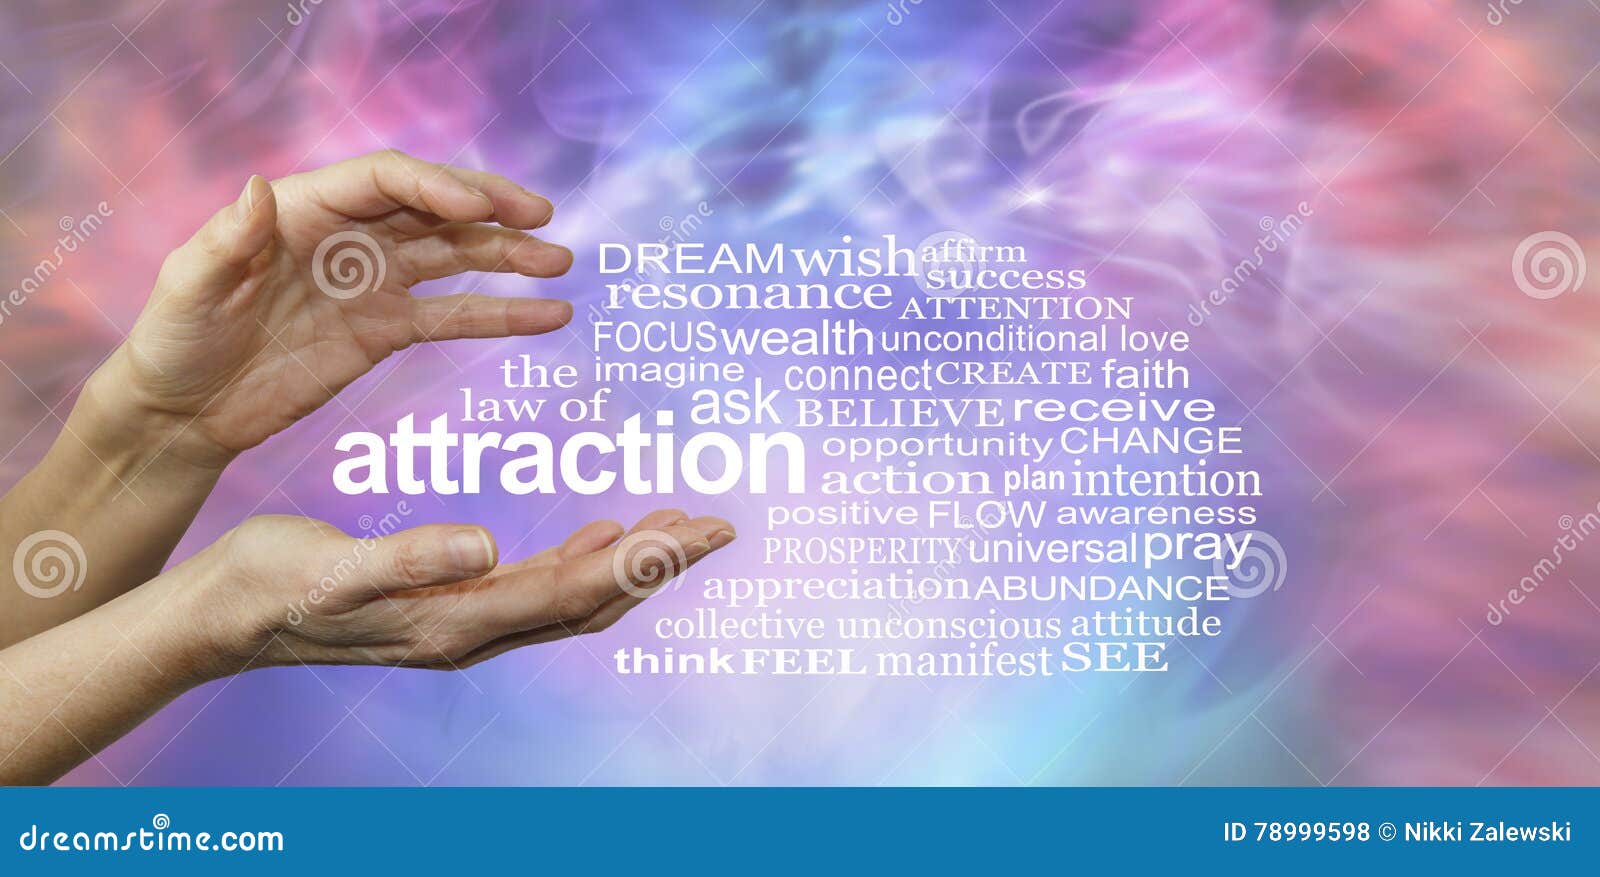 the law of attraction word cloud